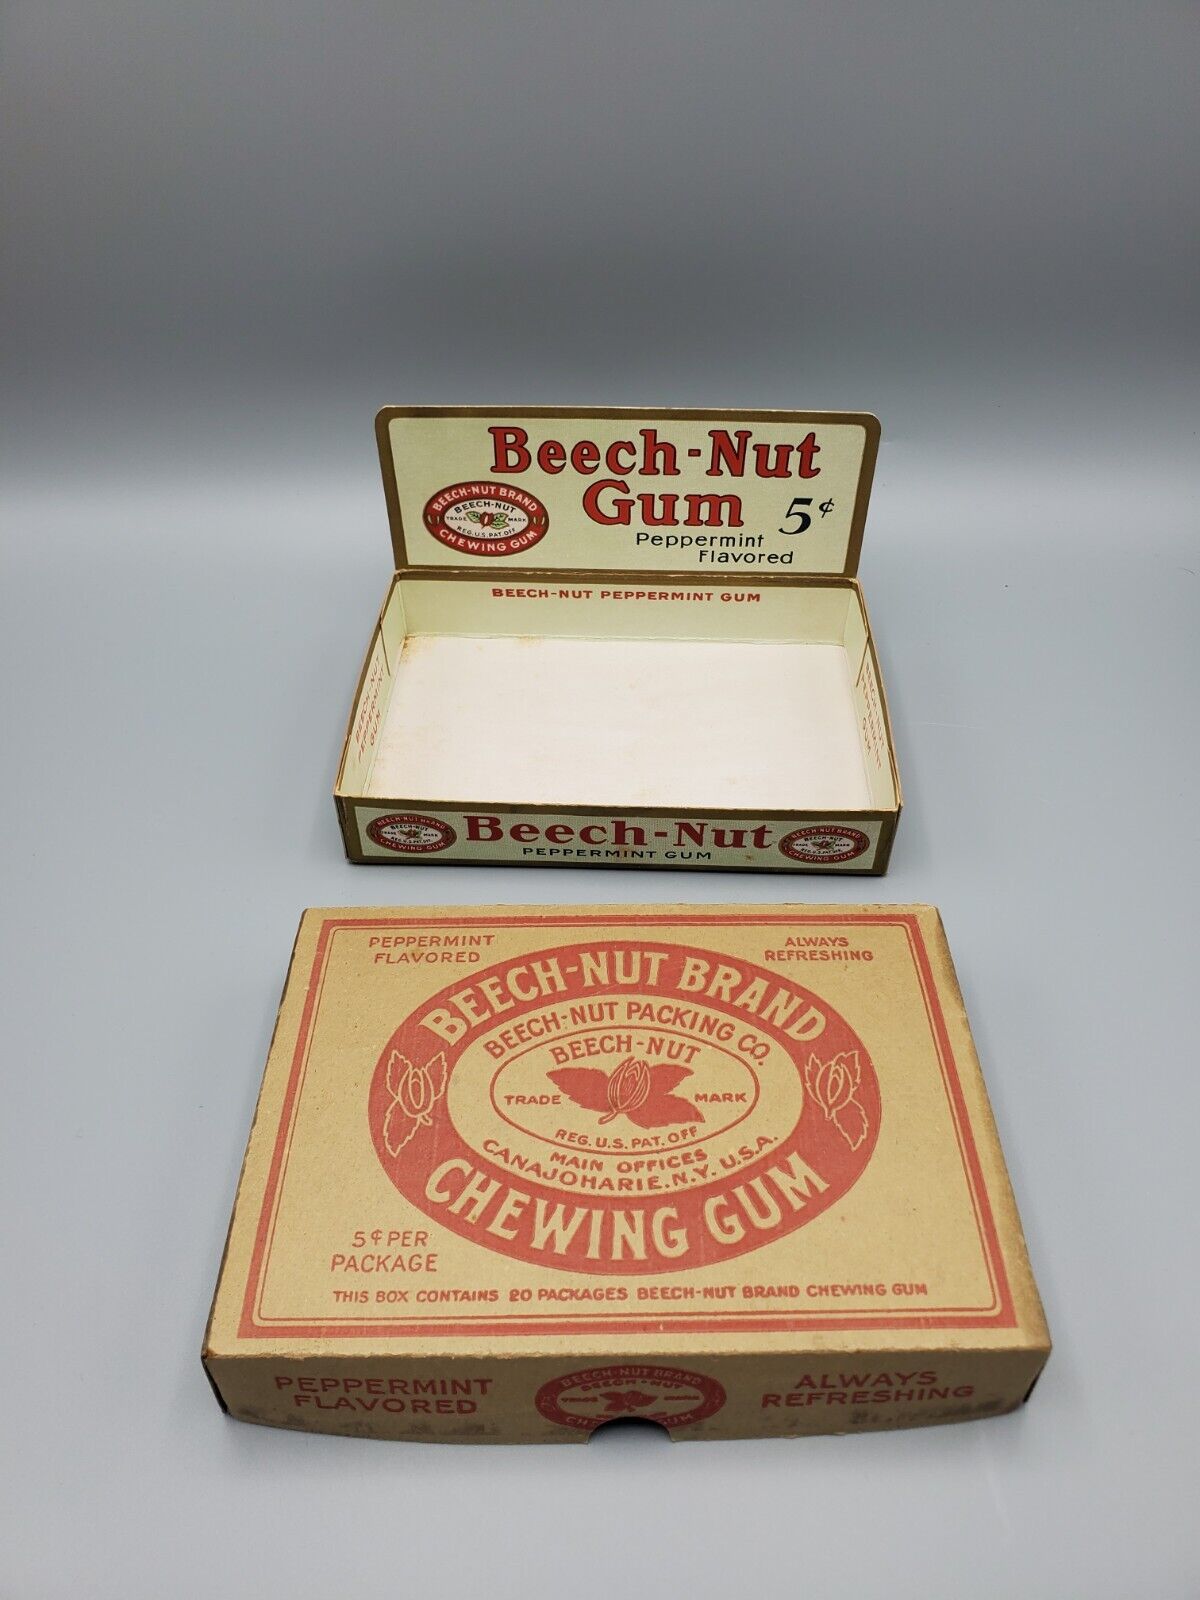 Vintage 1930s Beech-Nut Brand Chewing Gum Box - RARE Exceptional 1938 Antique 